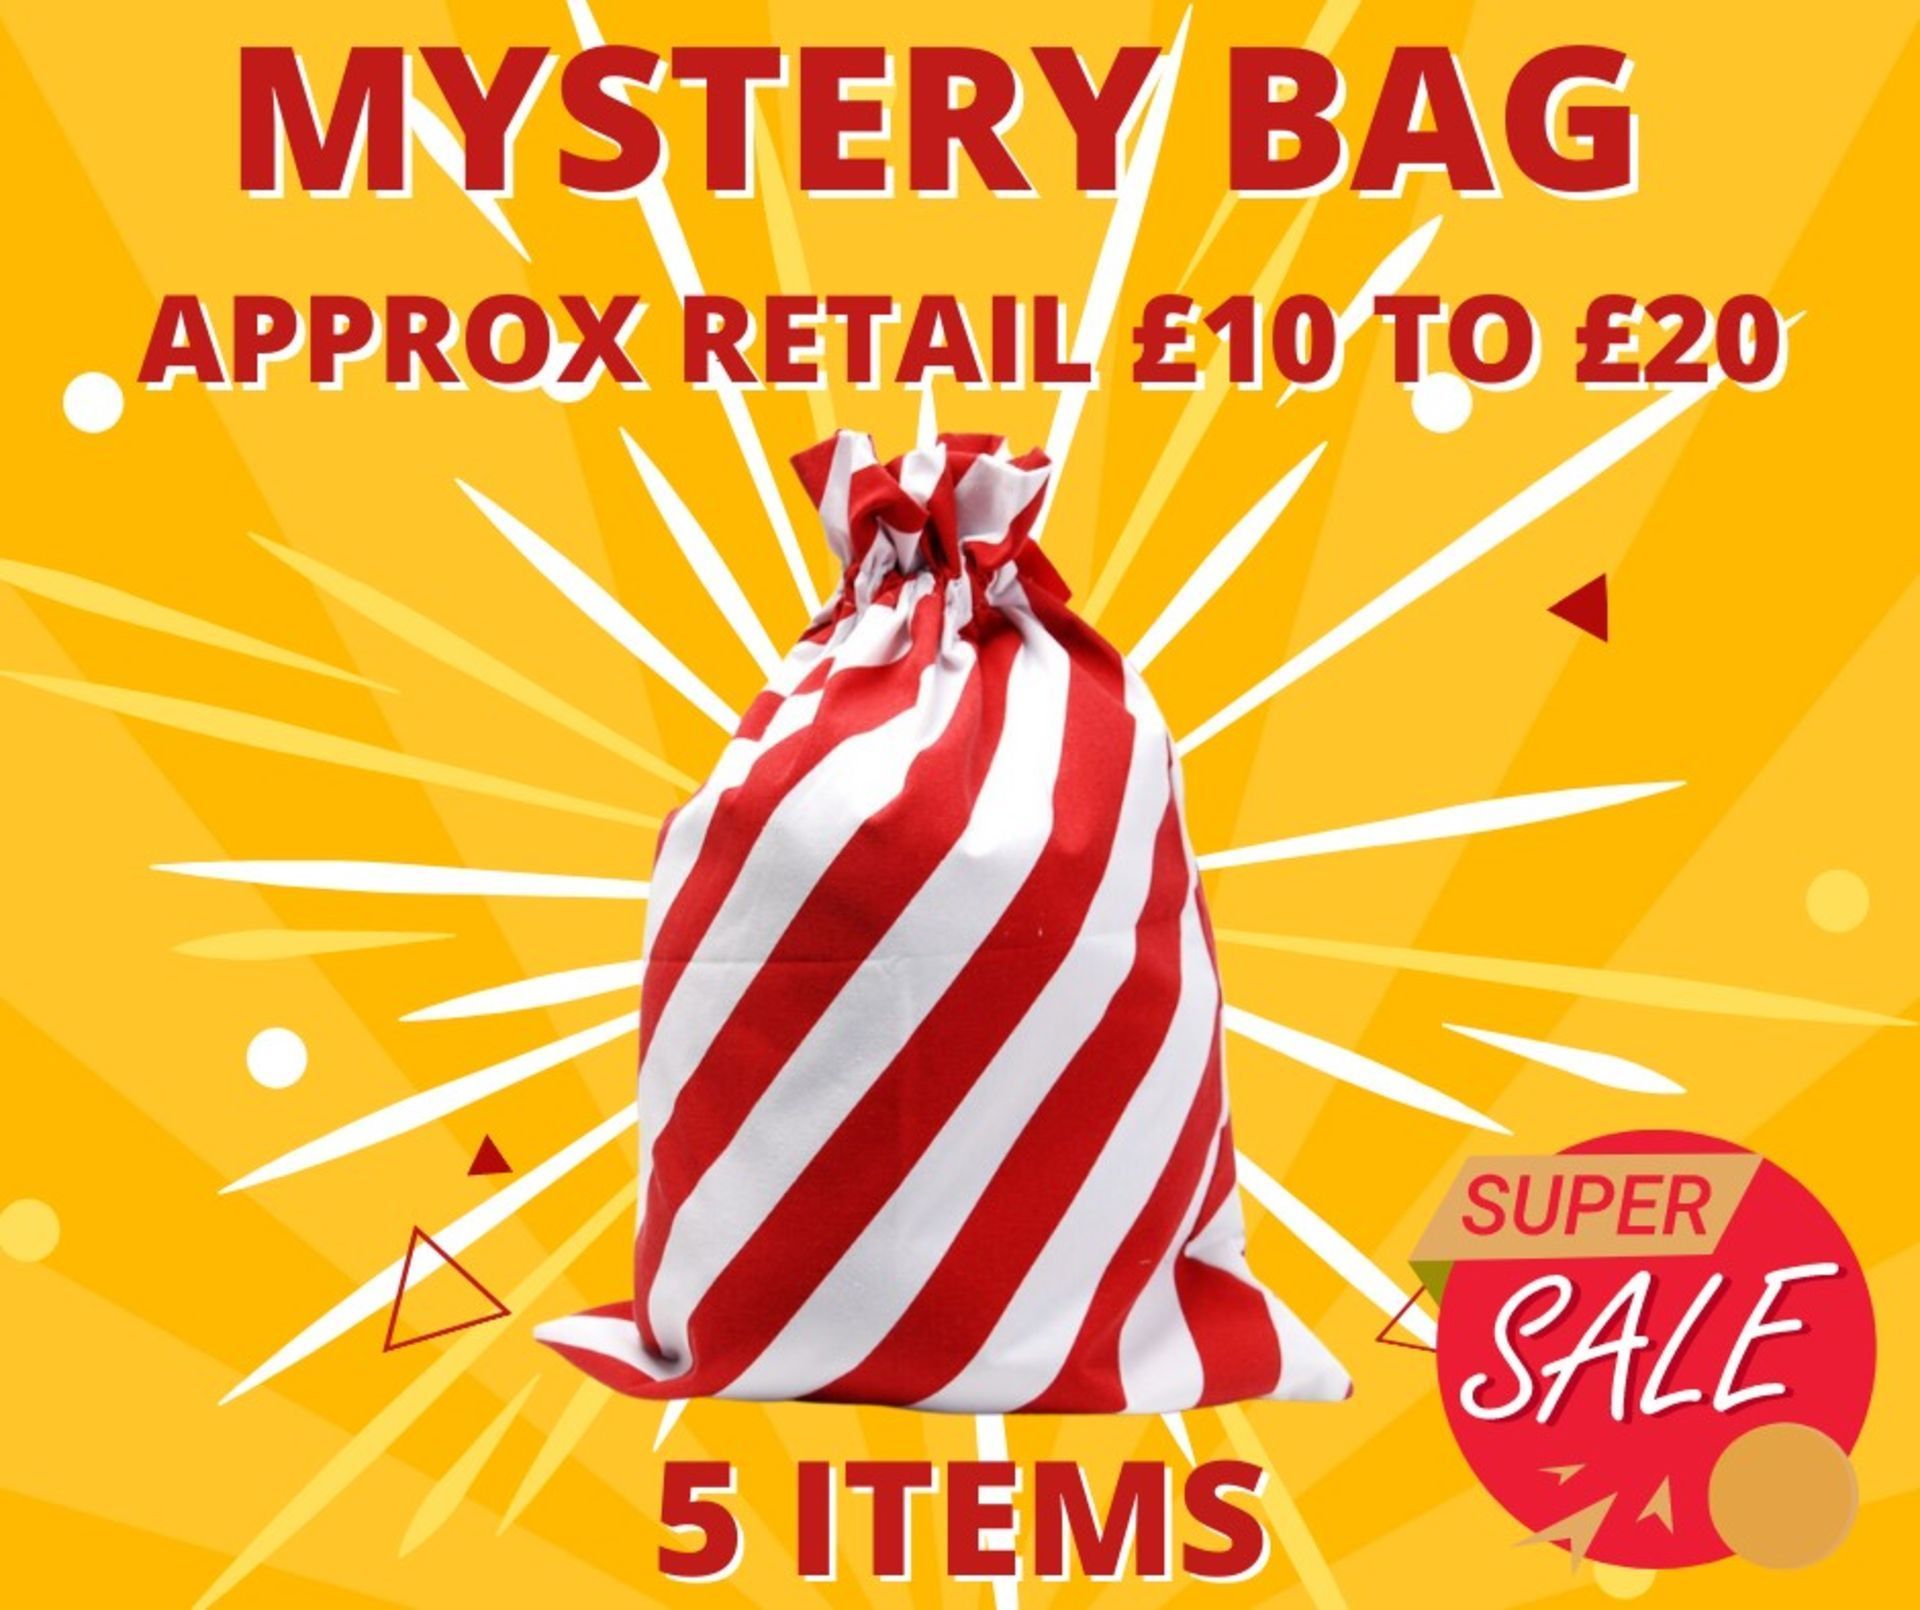 NEW MYSTERY BAG WITH 5 NEW ASSORTED AMAZON ITEMS - BOX CONTENTS RRP £10 TO £20 - PLUS 2 FREE DVD